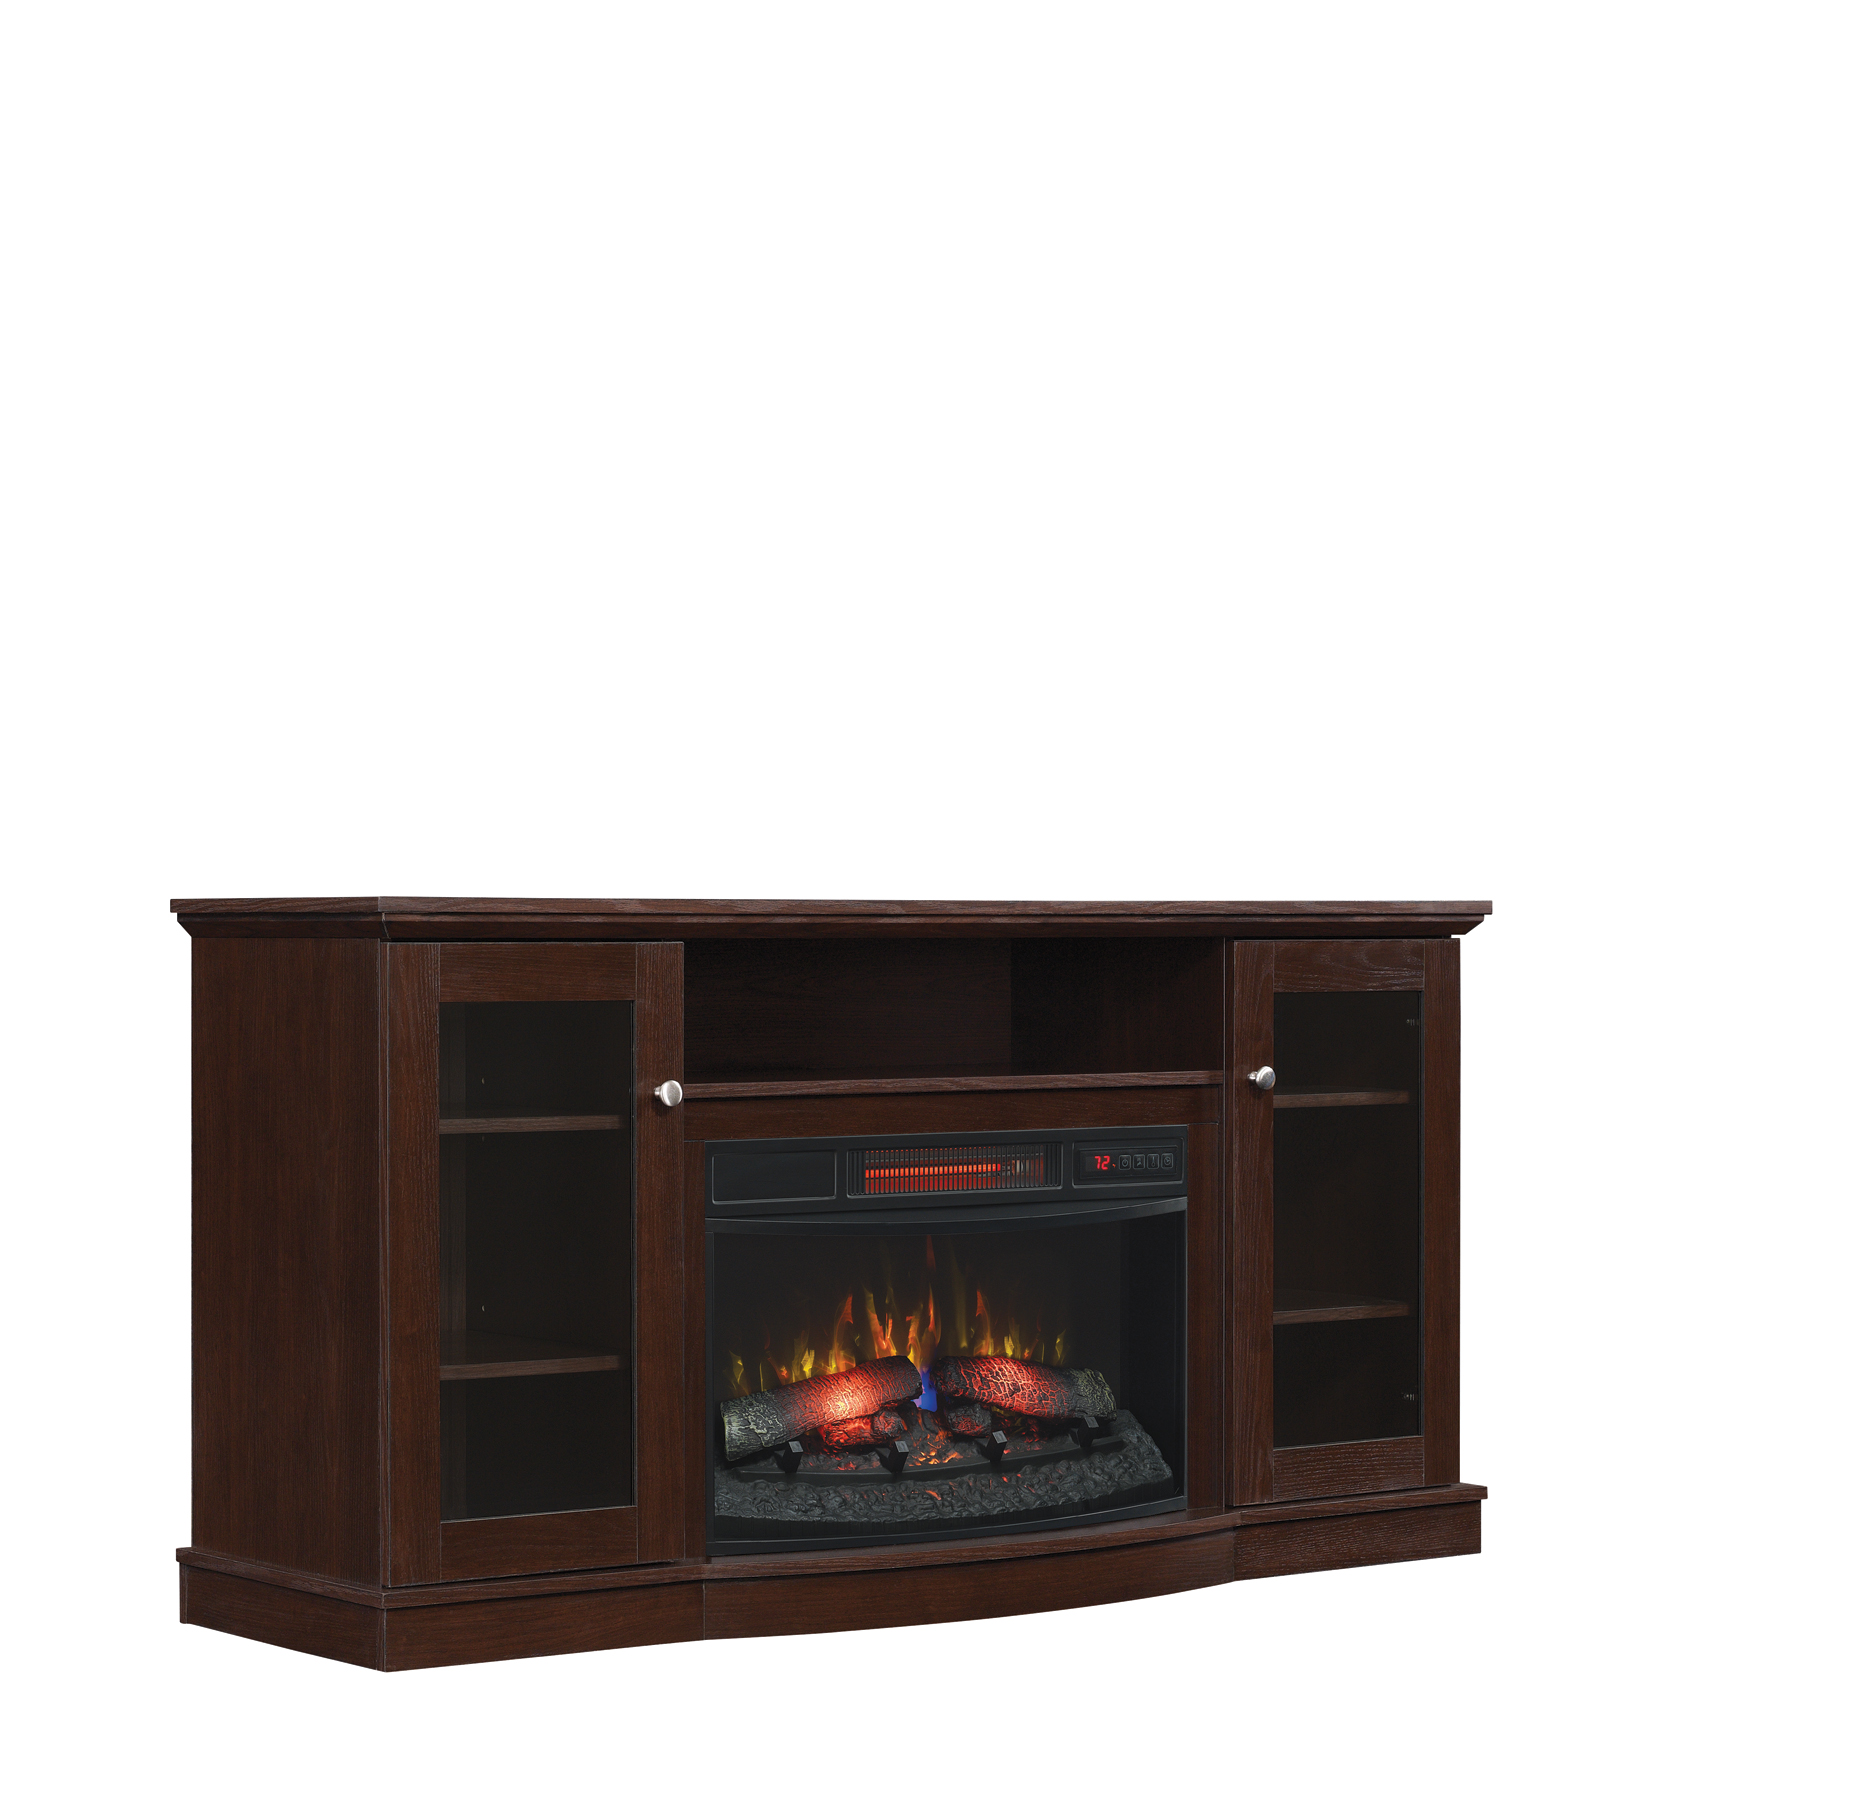 ChimneyFree Media Electric Fireplace for TVs up to 65'', Multiple Colors